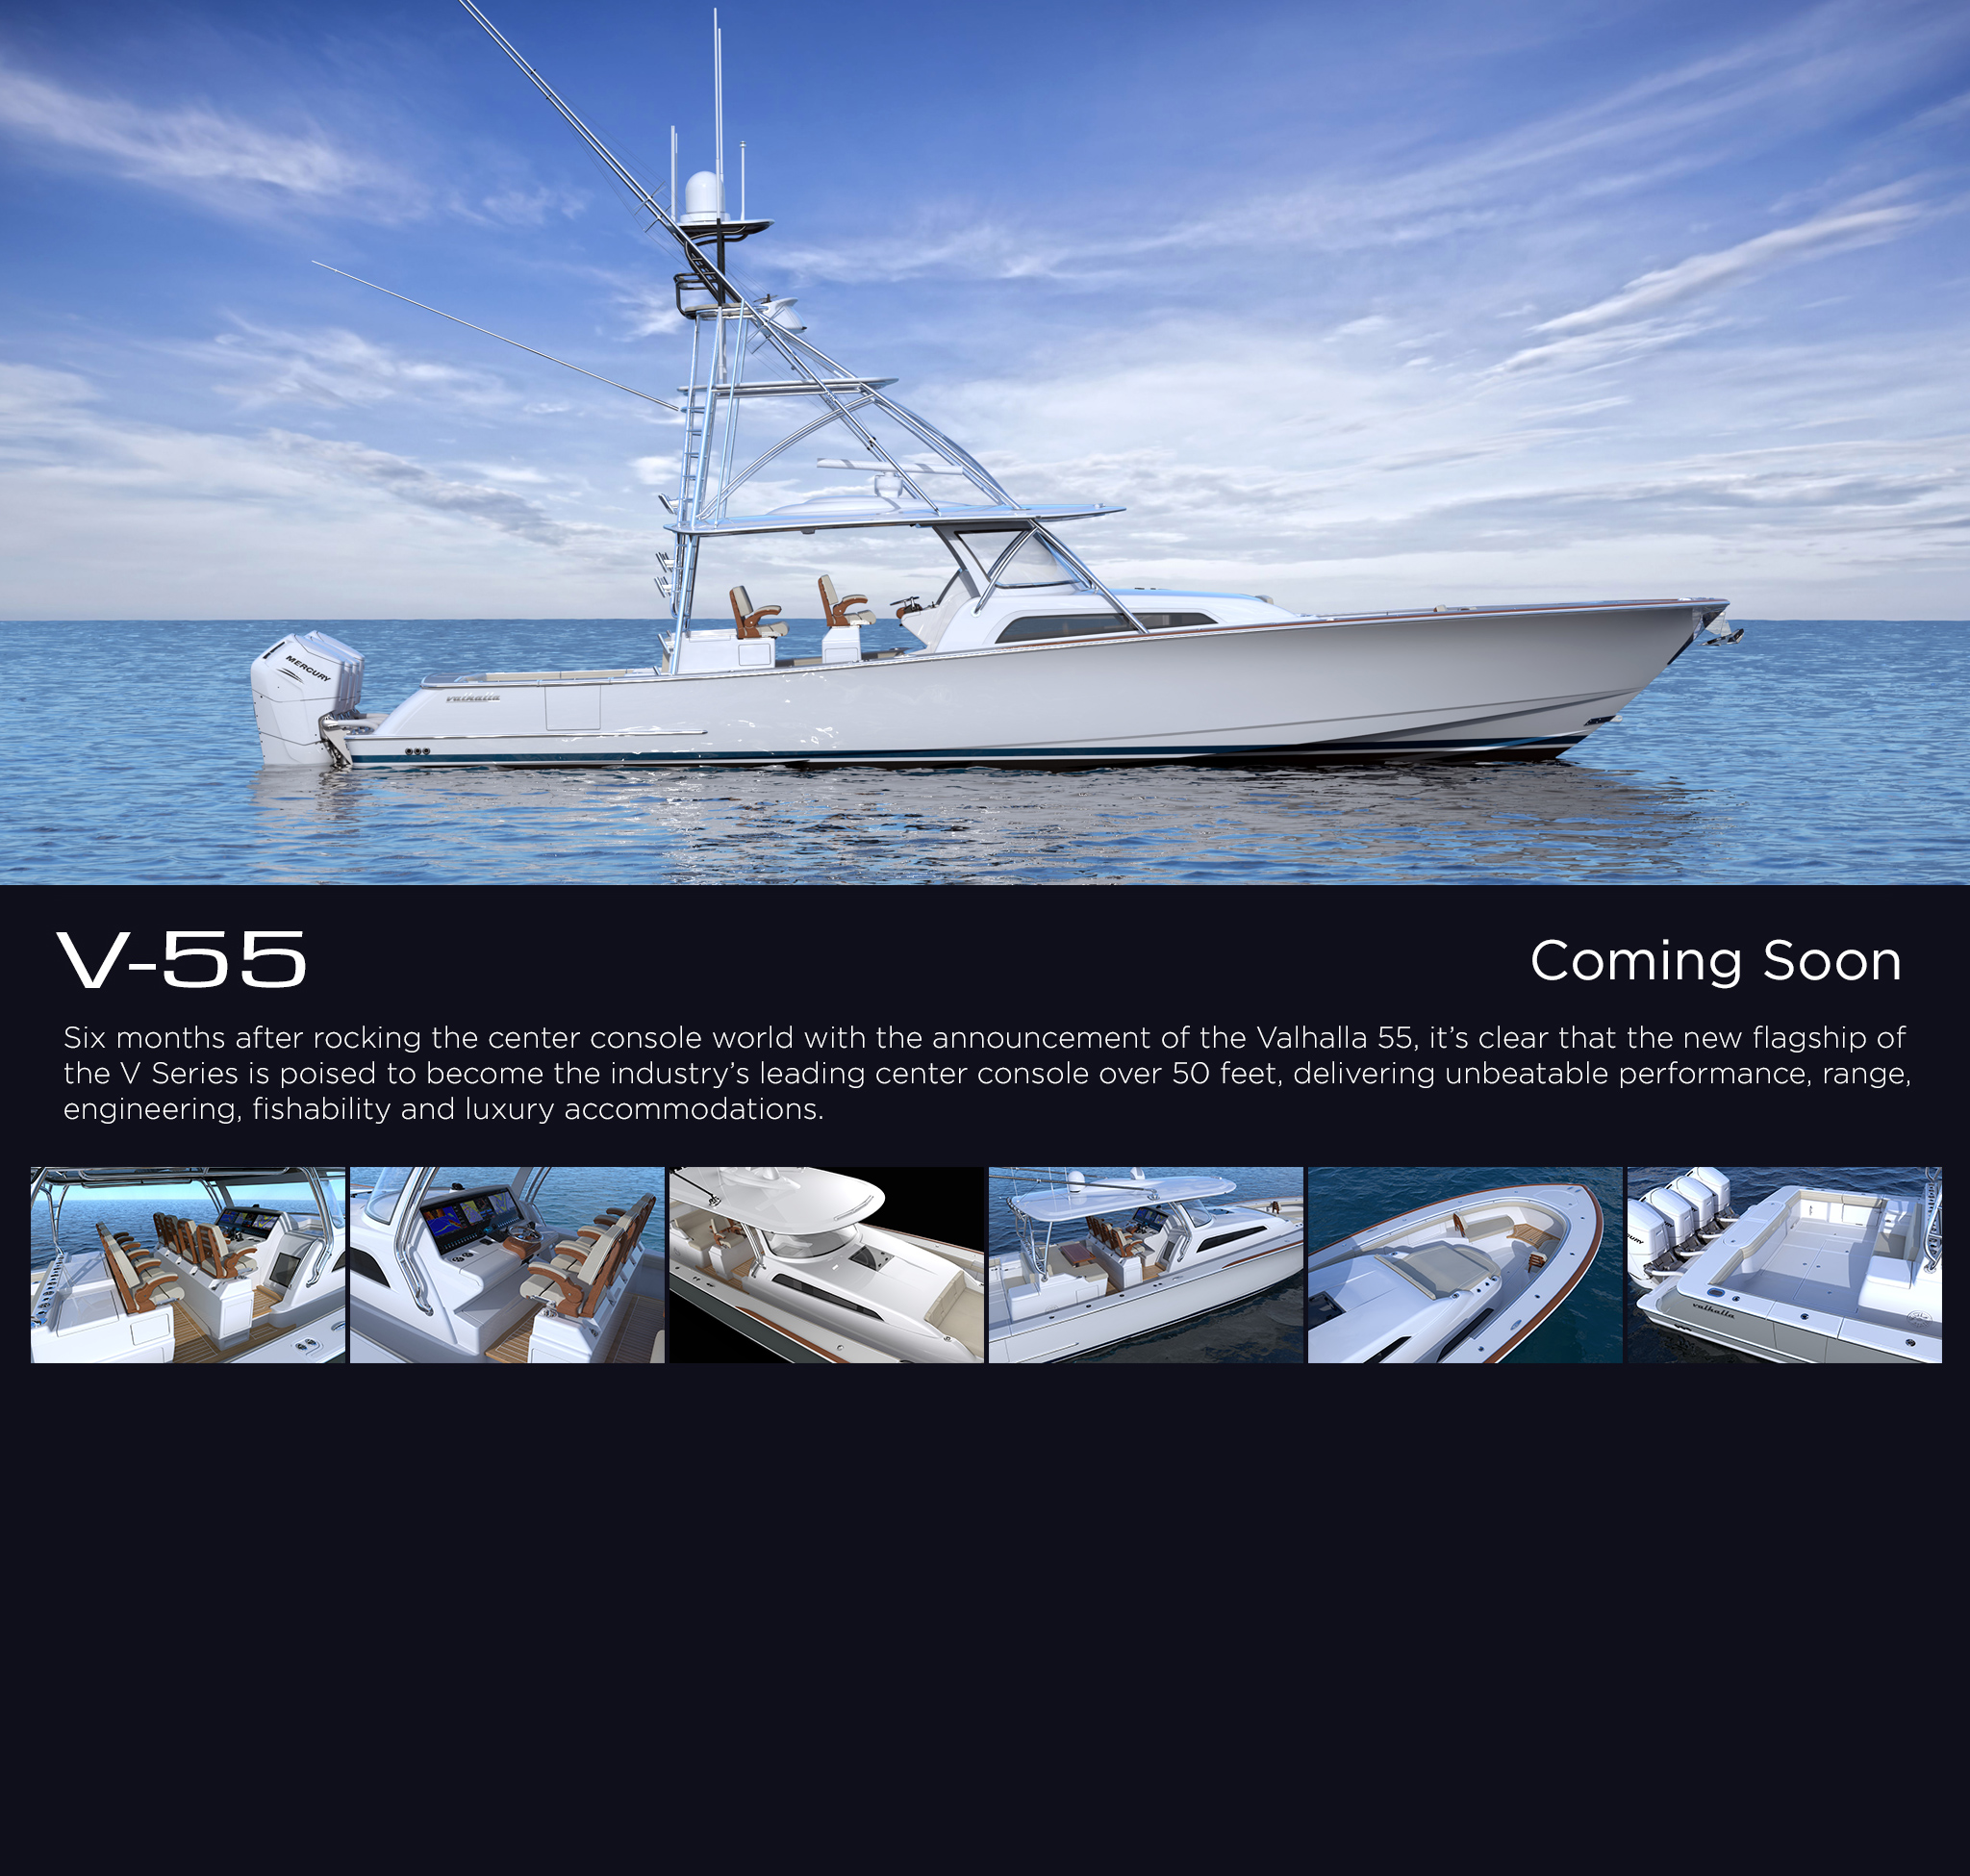 V-55 - Twelve months after rocking the center console world with the introduction of the revolutionary V-46 center console, Valhalla Boatworks has stolen the spotlight again with the announcement of the all-new Valhalla 55.